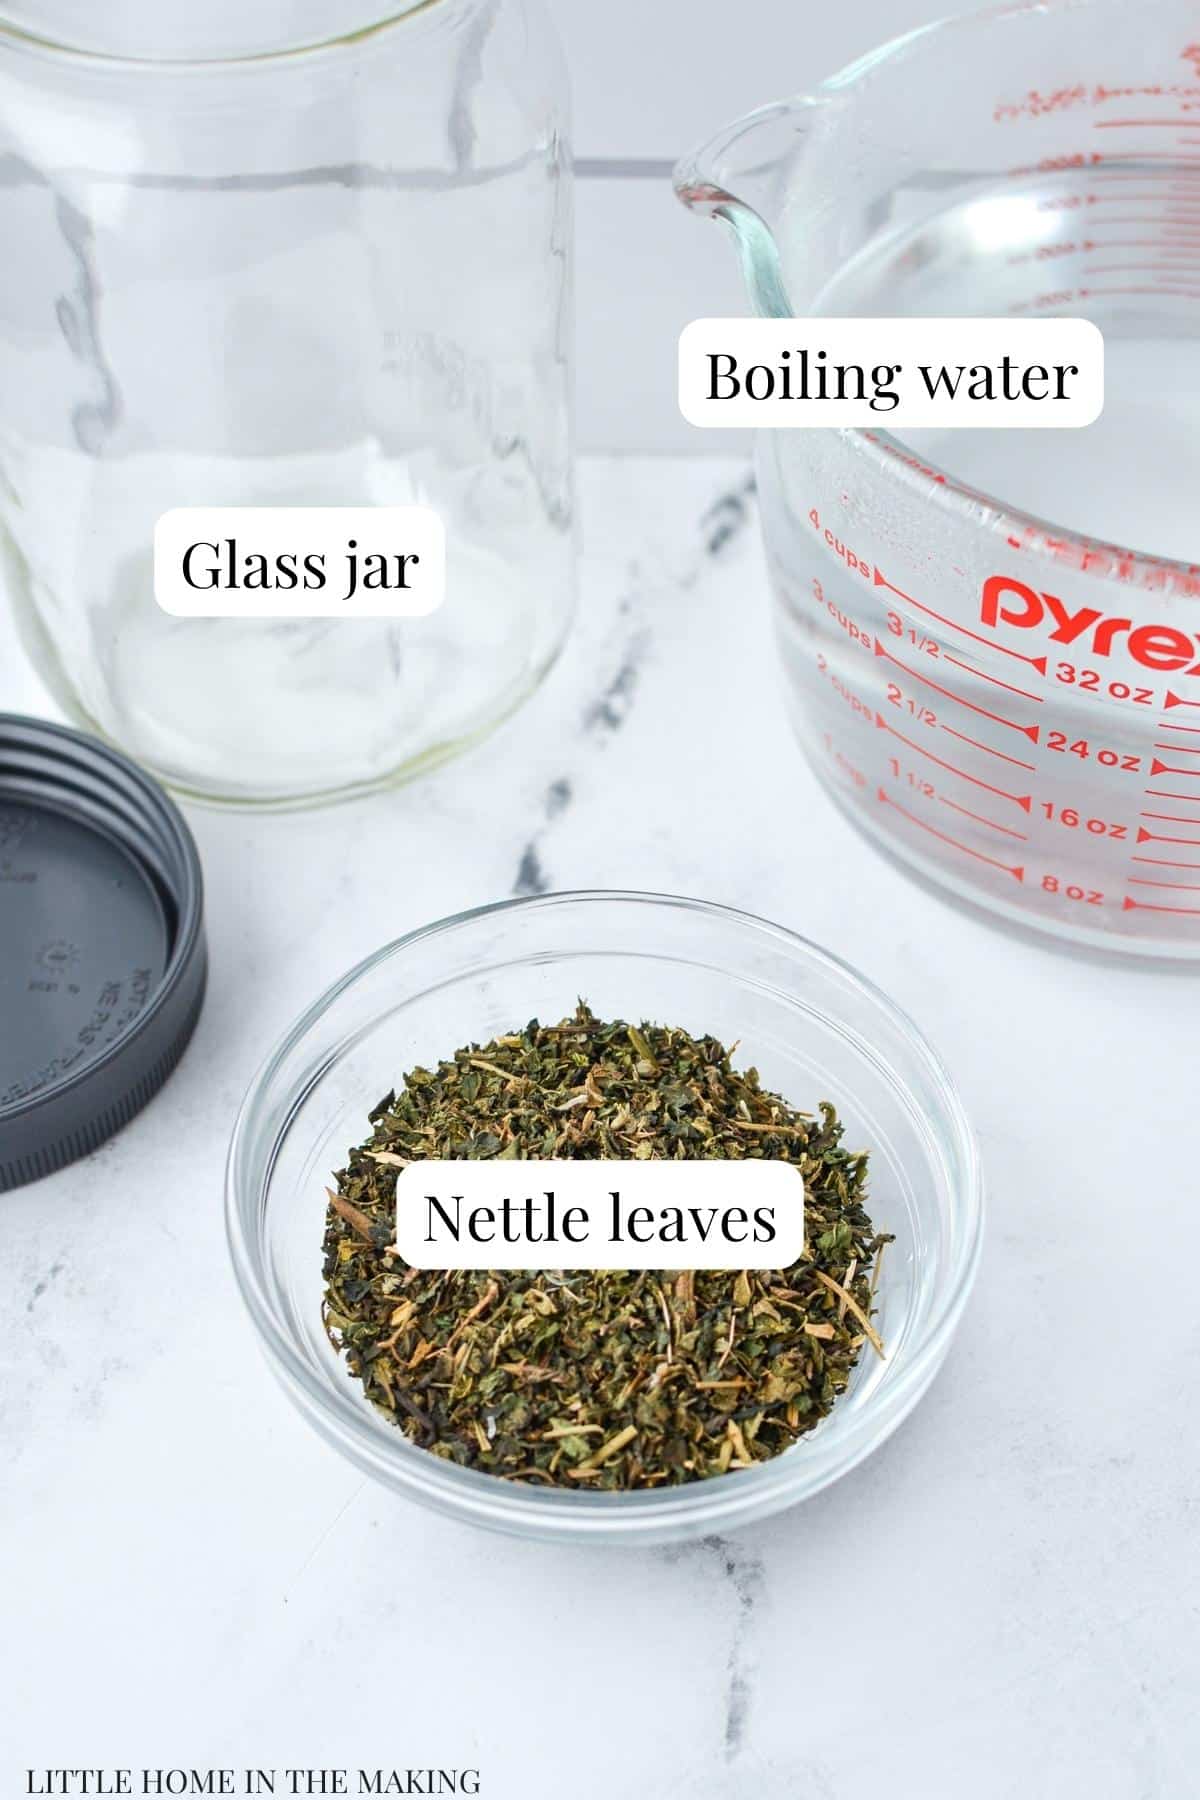 The ingredients needed to make a nettle infusion.